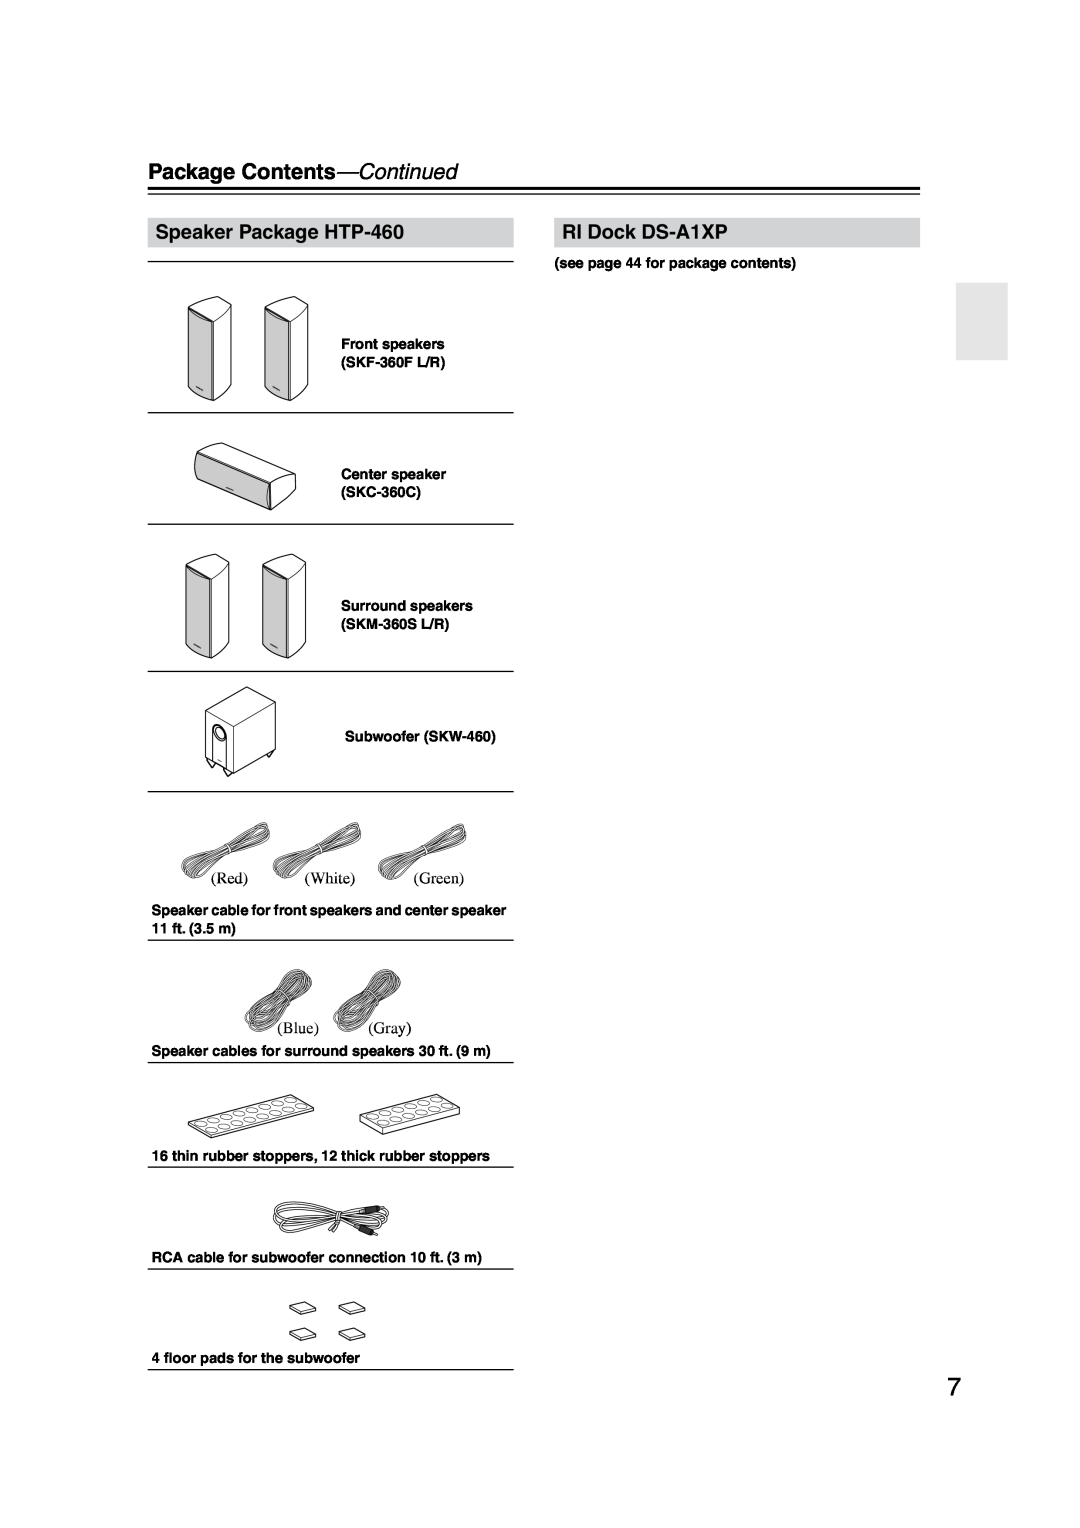 Onkyo HT-S4100 instruction manual Package Contents-Continued, see page 44 for package contents, Subwoofer SKW-460 